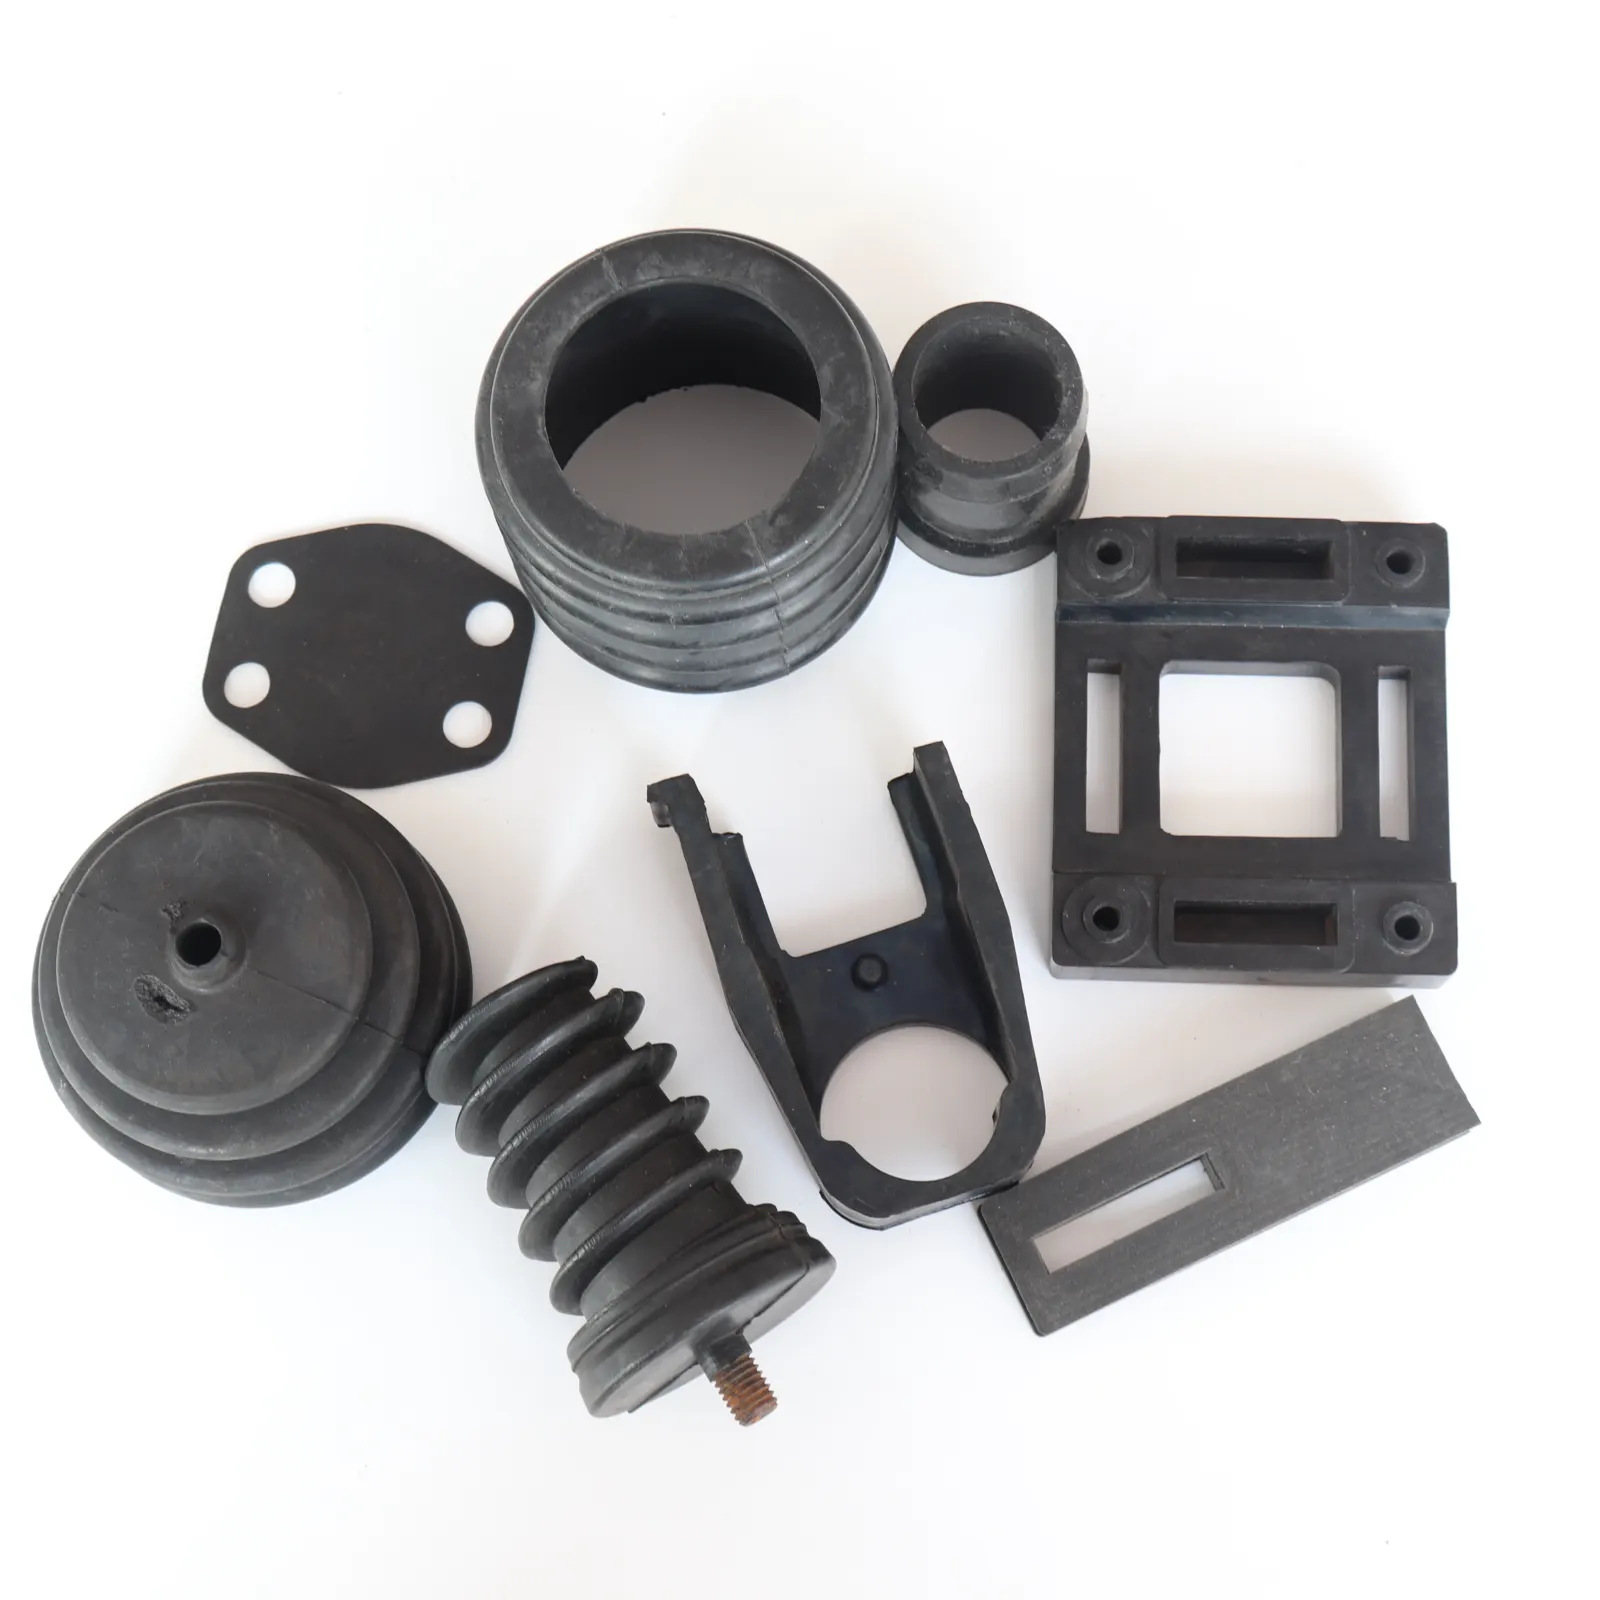 Rubber Products Special-shaped Parts Silicone product seal ring Shock-absorbing cushion rubber profile